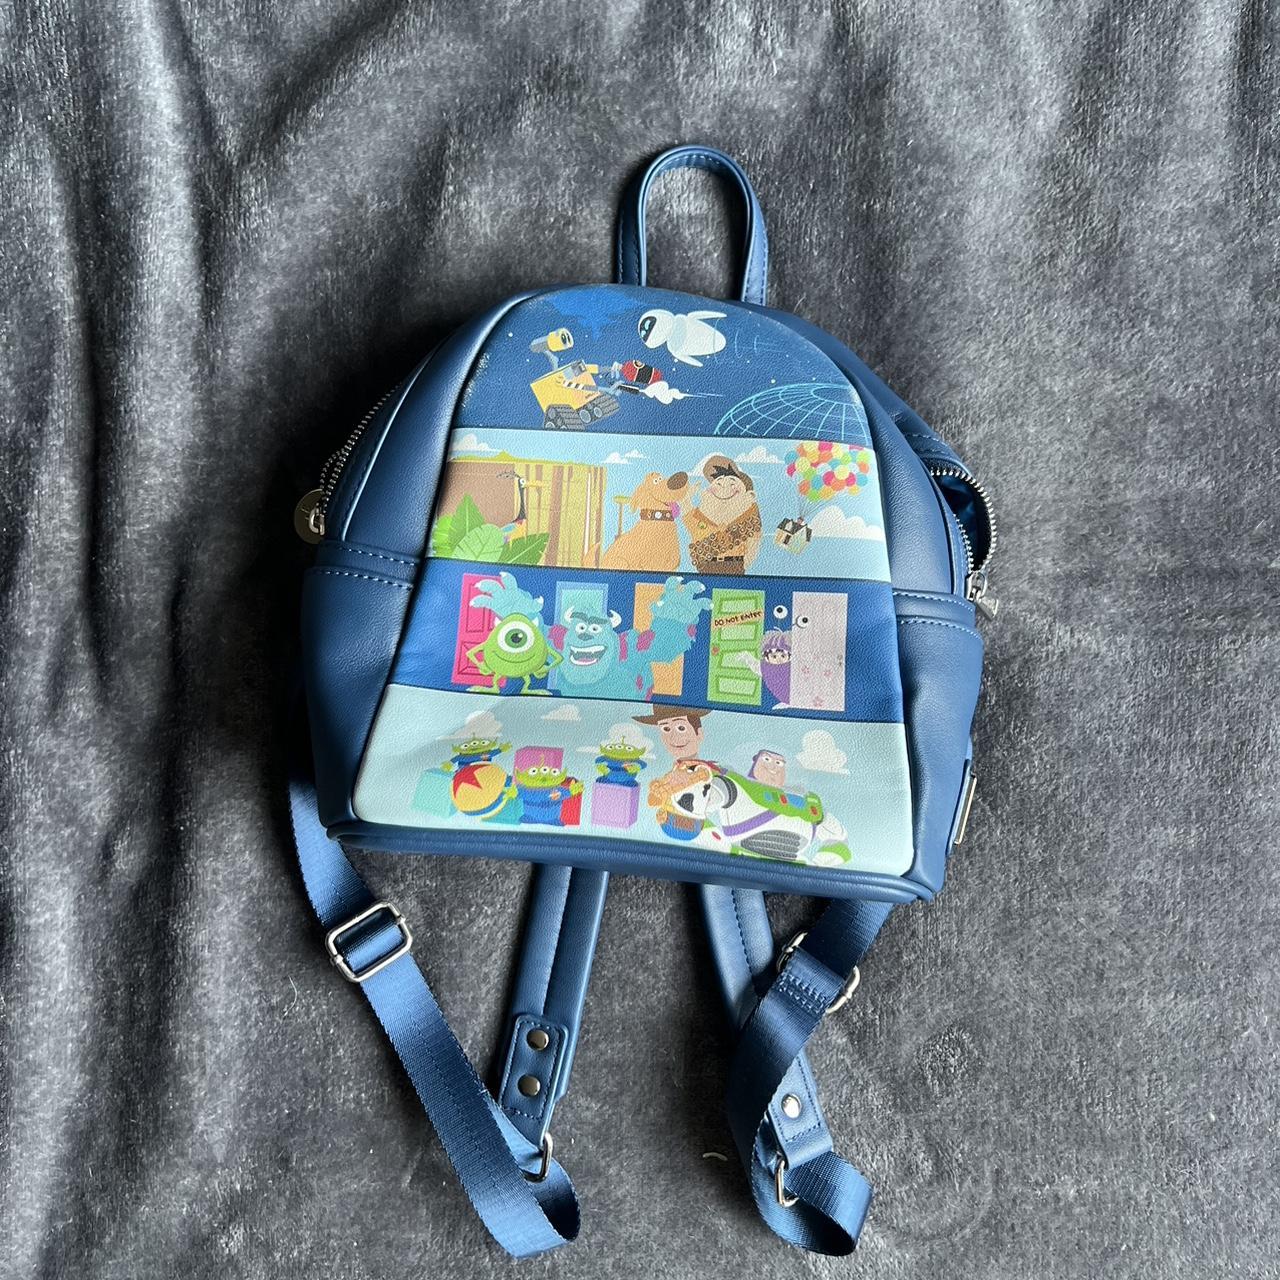 Monsters Inc Sully Loungefly Backpack - Depop